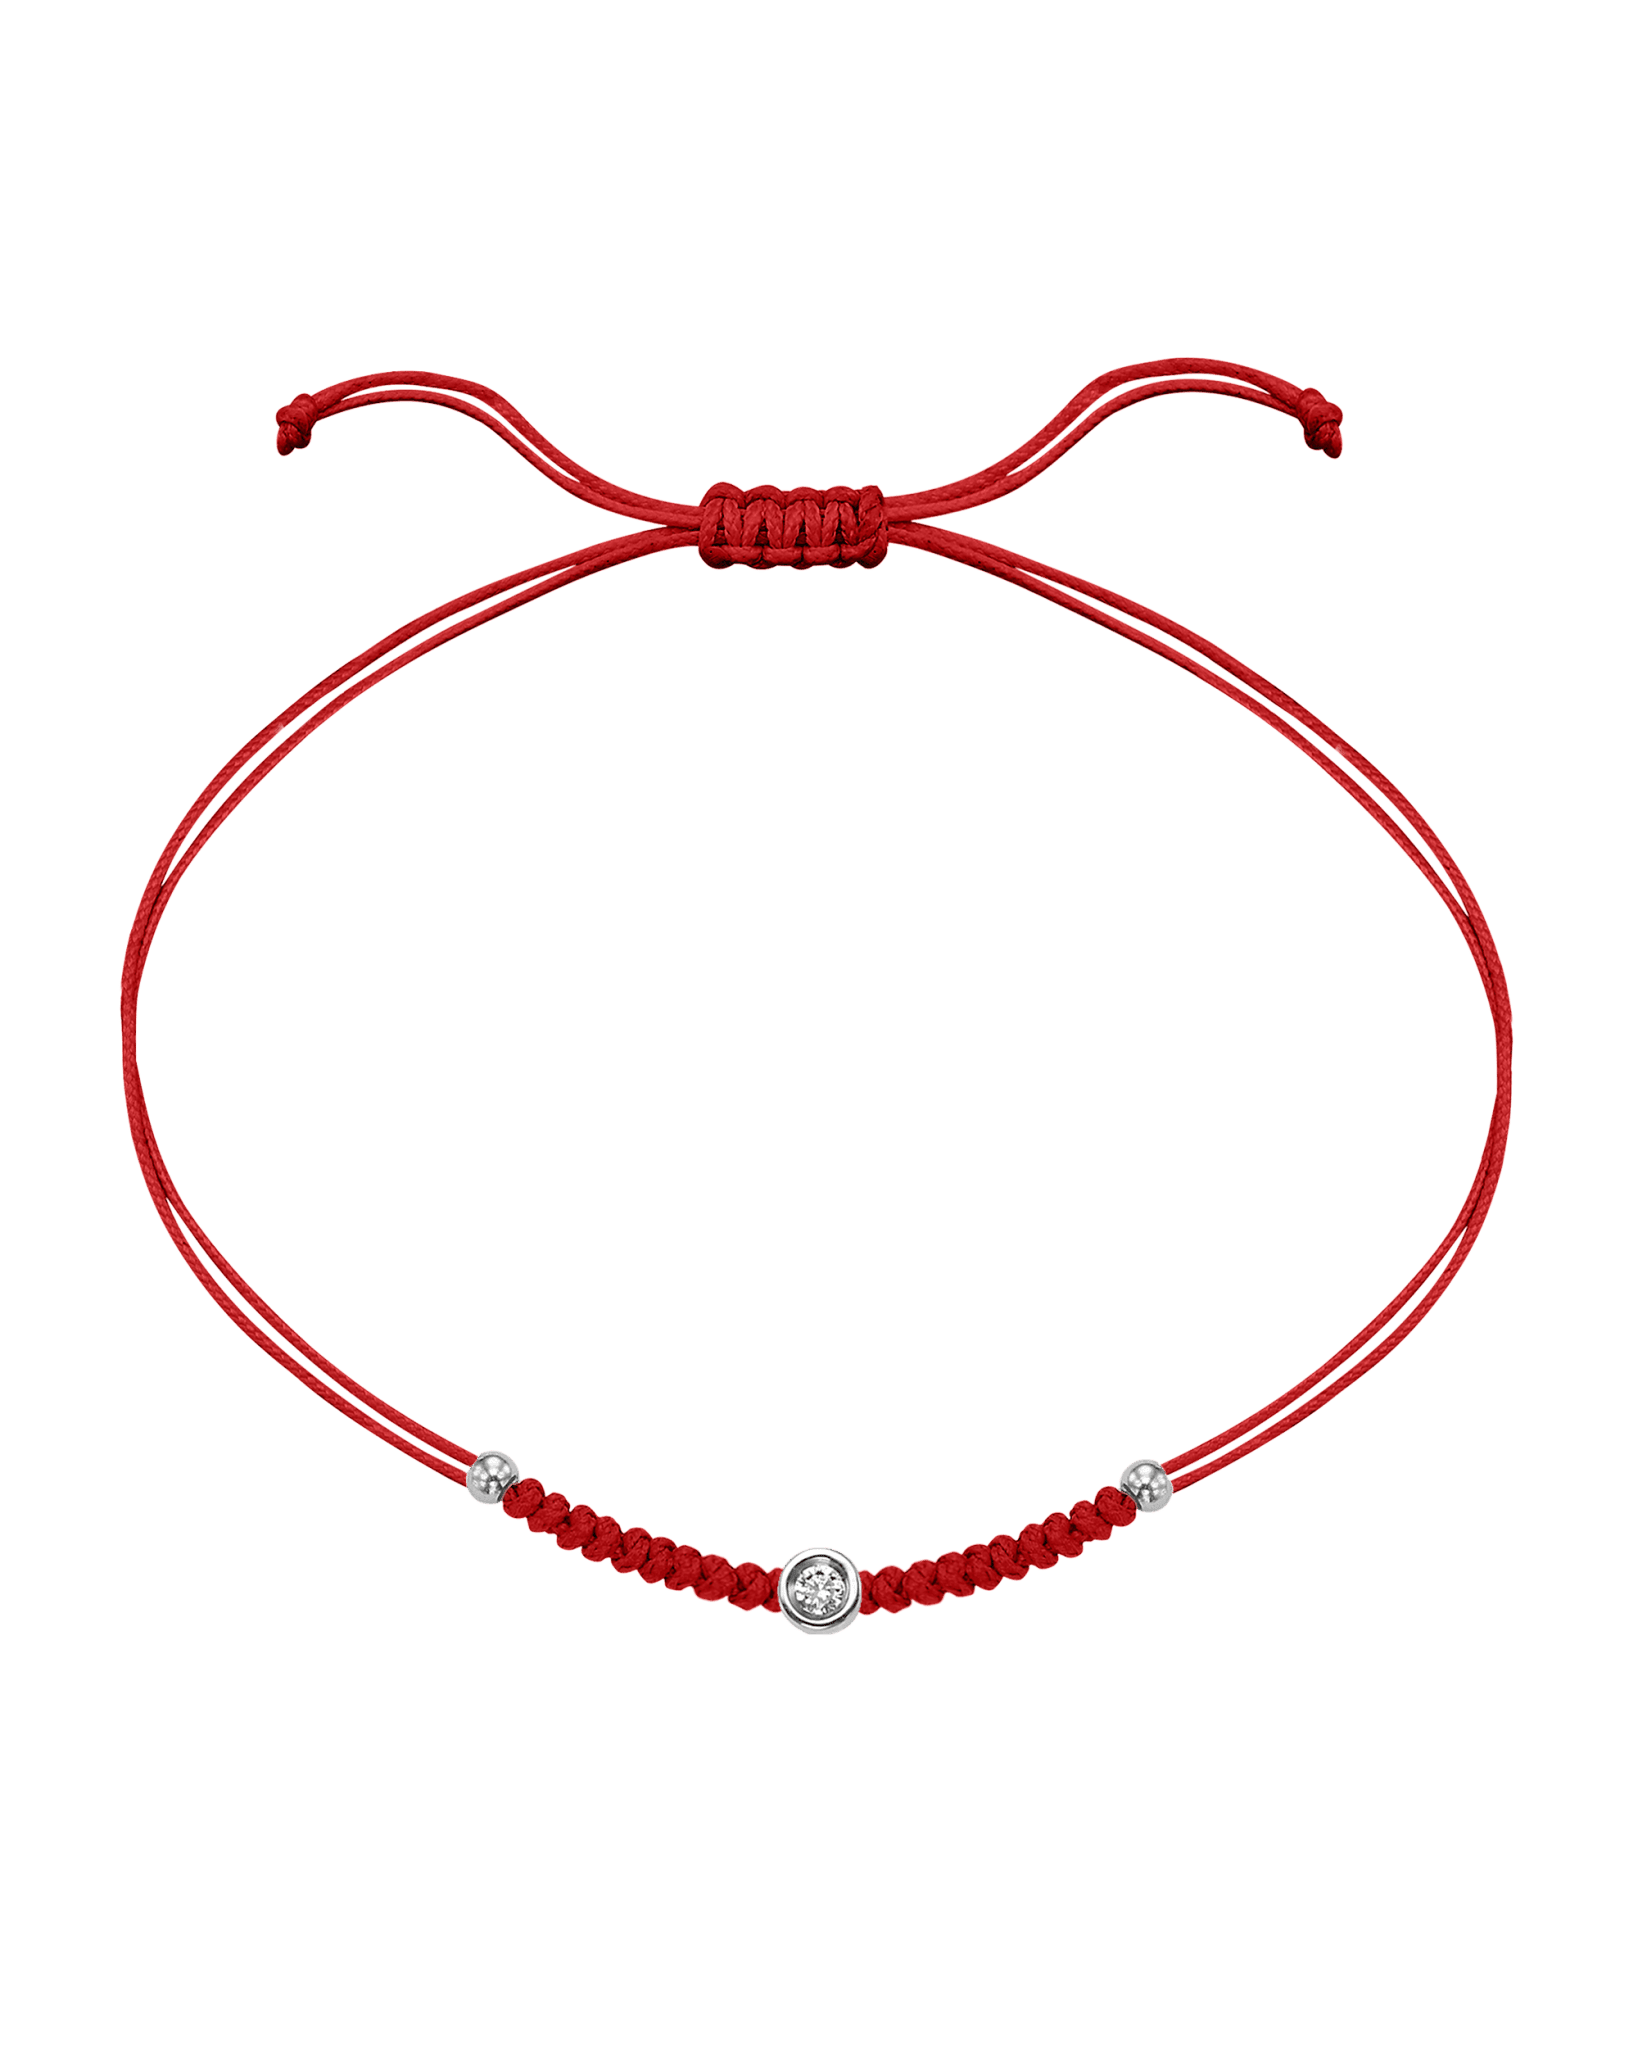 Solid Gold Sphere String of Love - 14K White Gold Bracelet 14K Solid Gold Red Small: 0.03ct 